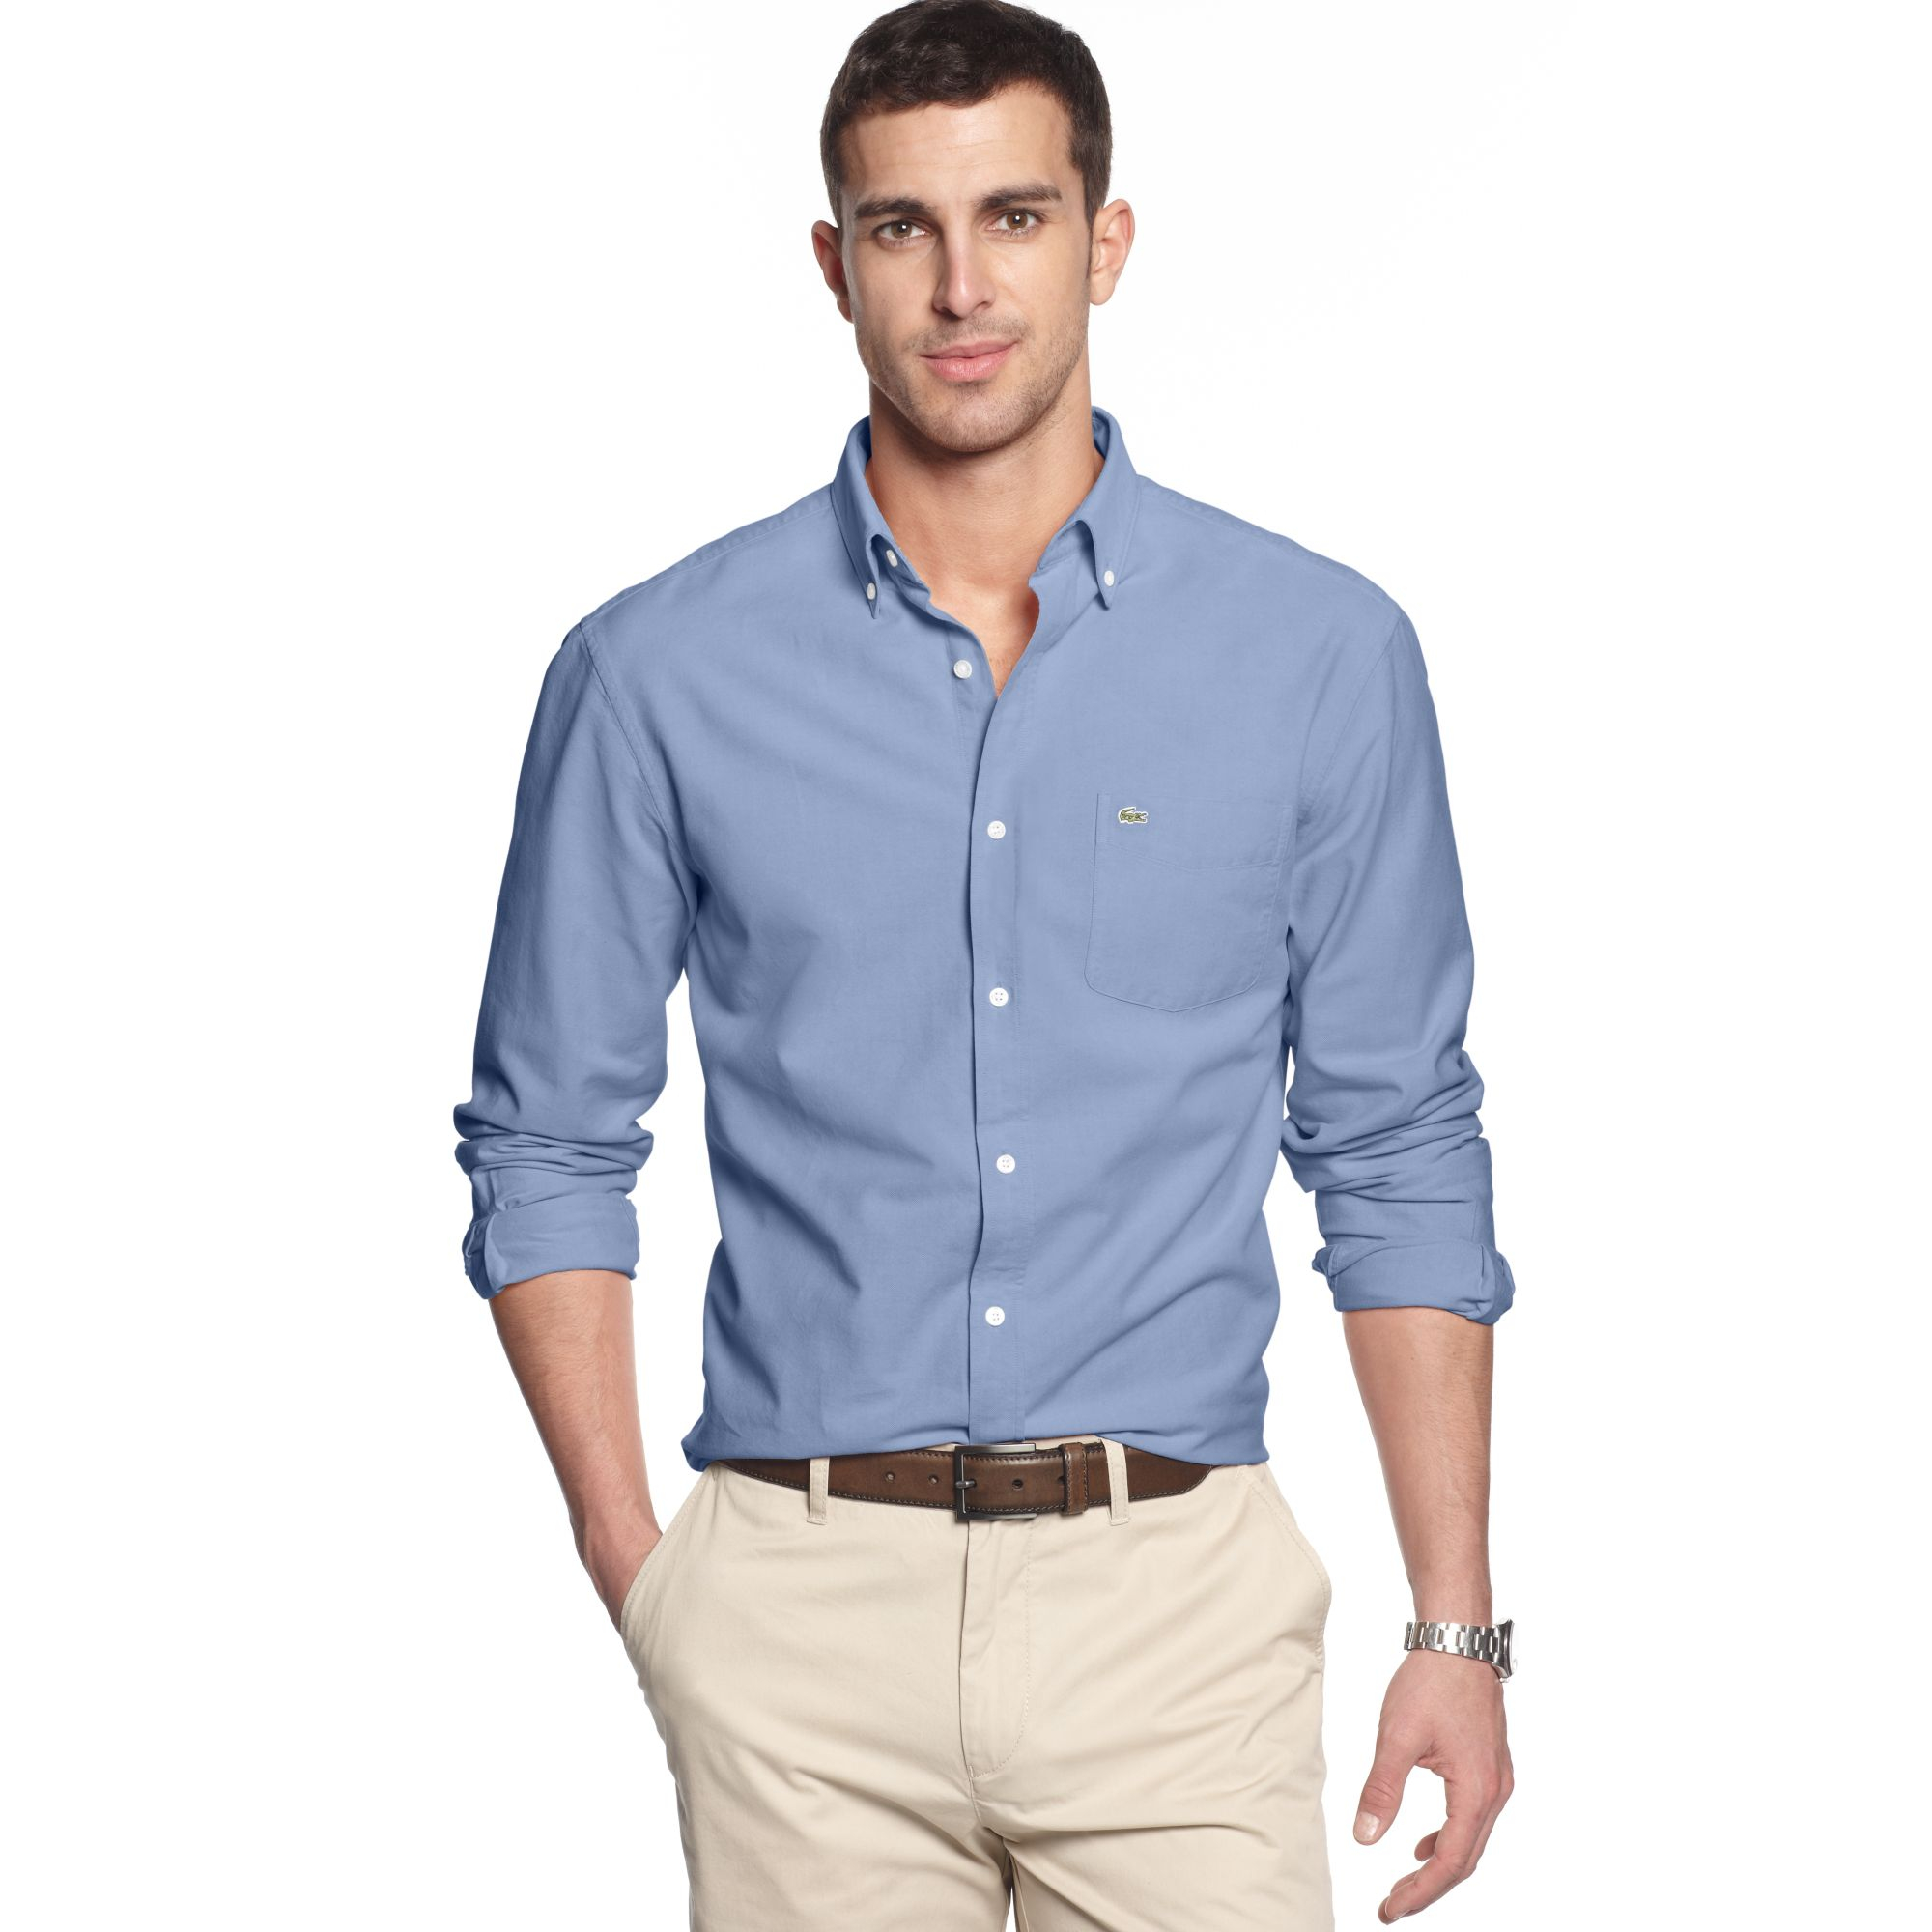 Lyst - Lacoste Long Sleeve Regular Fit Oxford Woven Shirt in Blue for Men